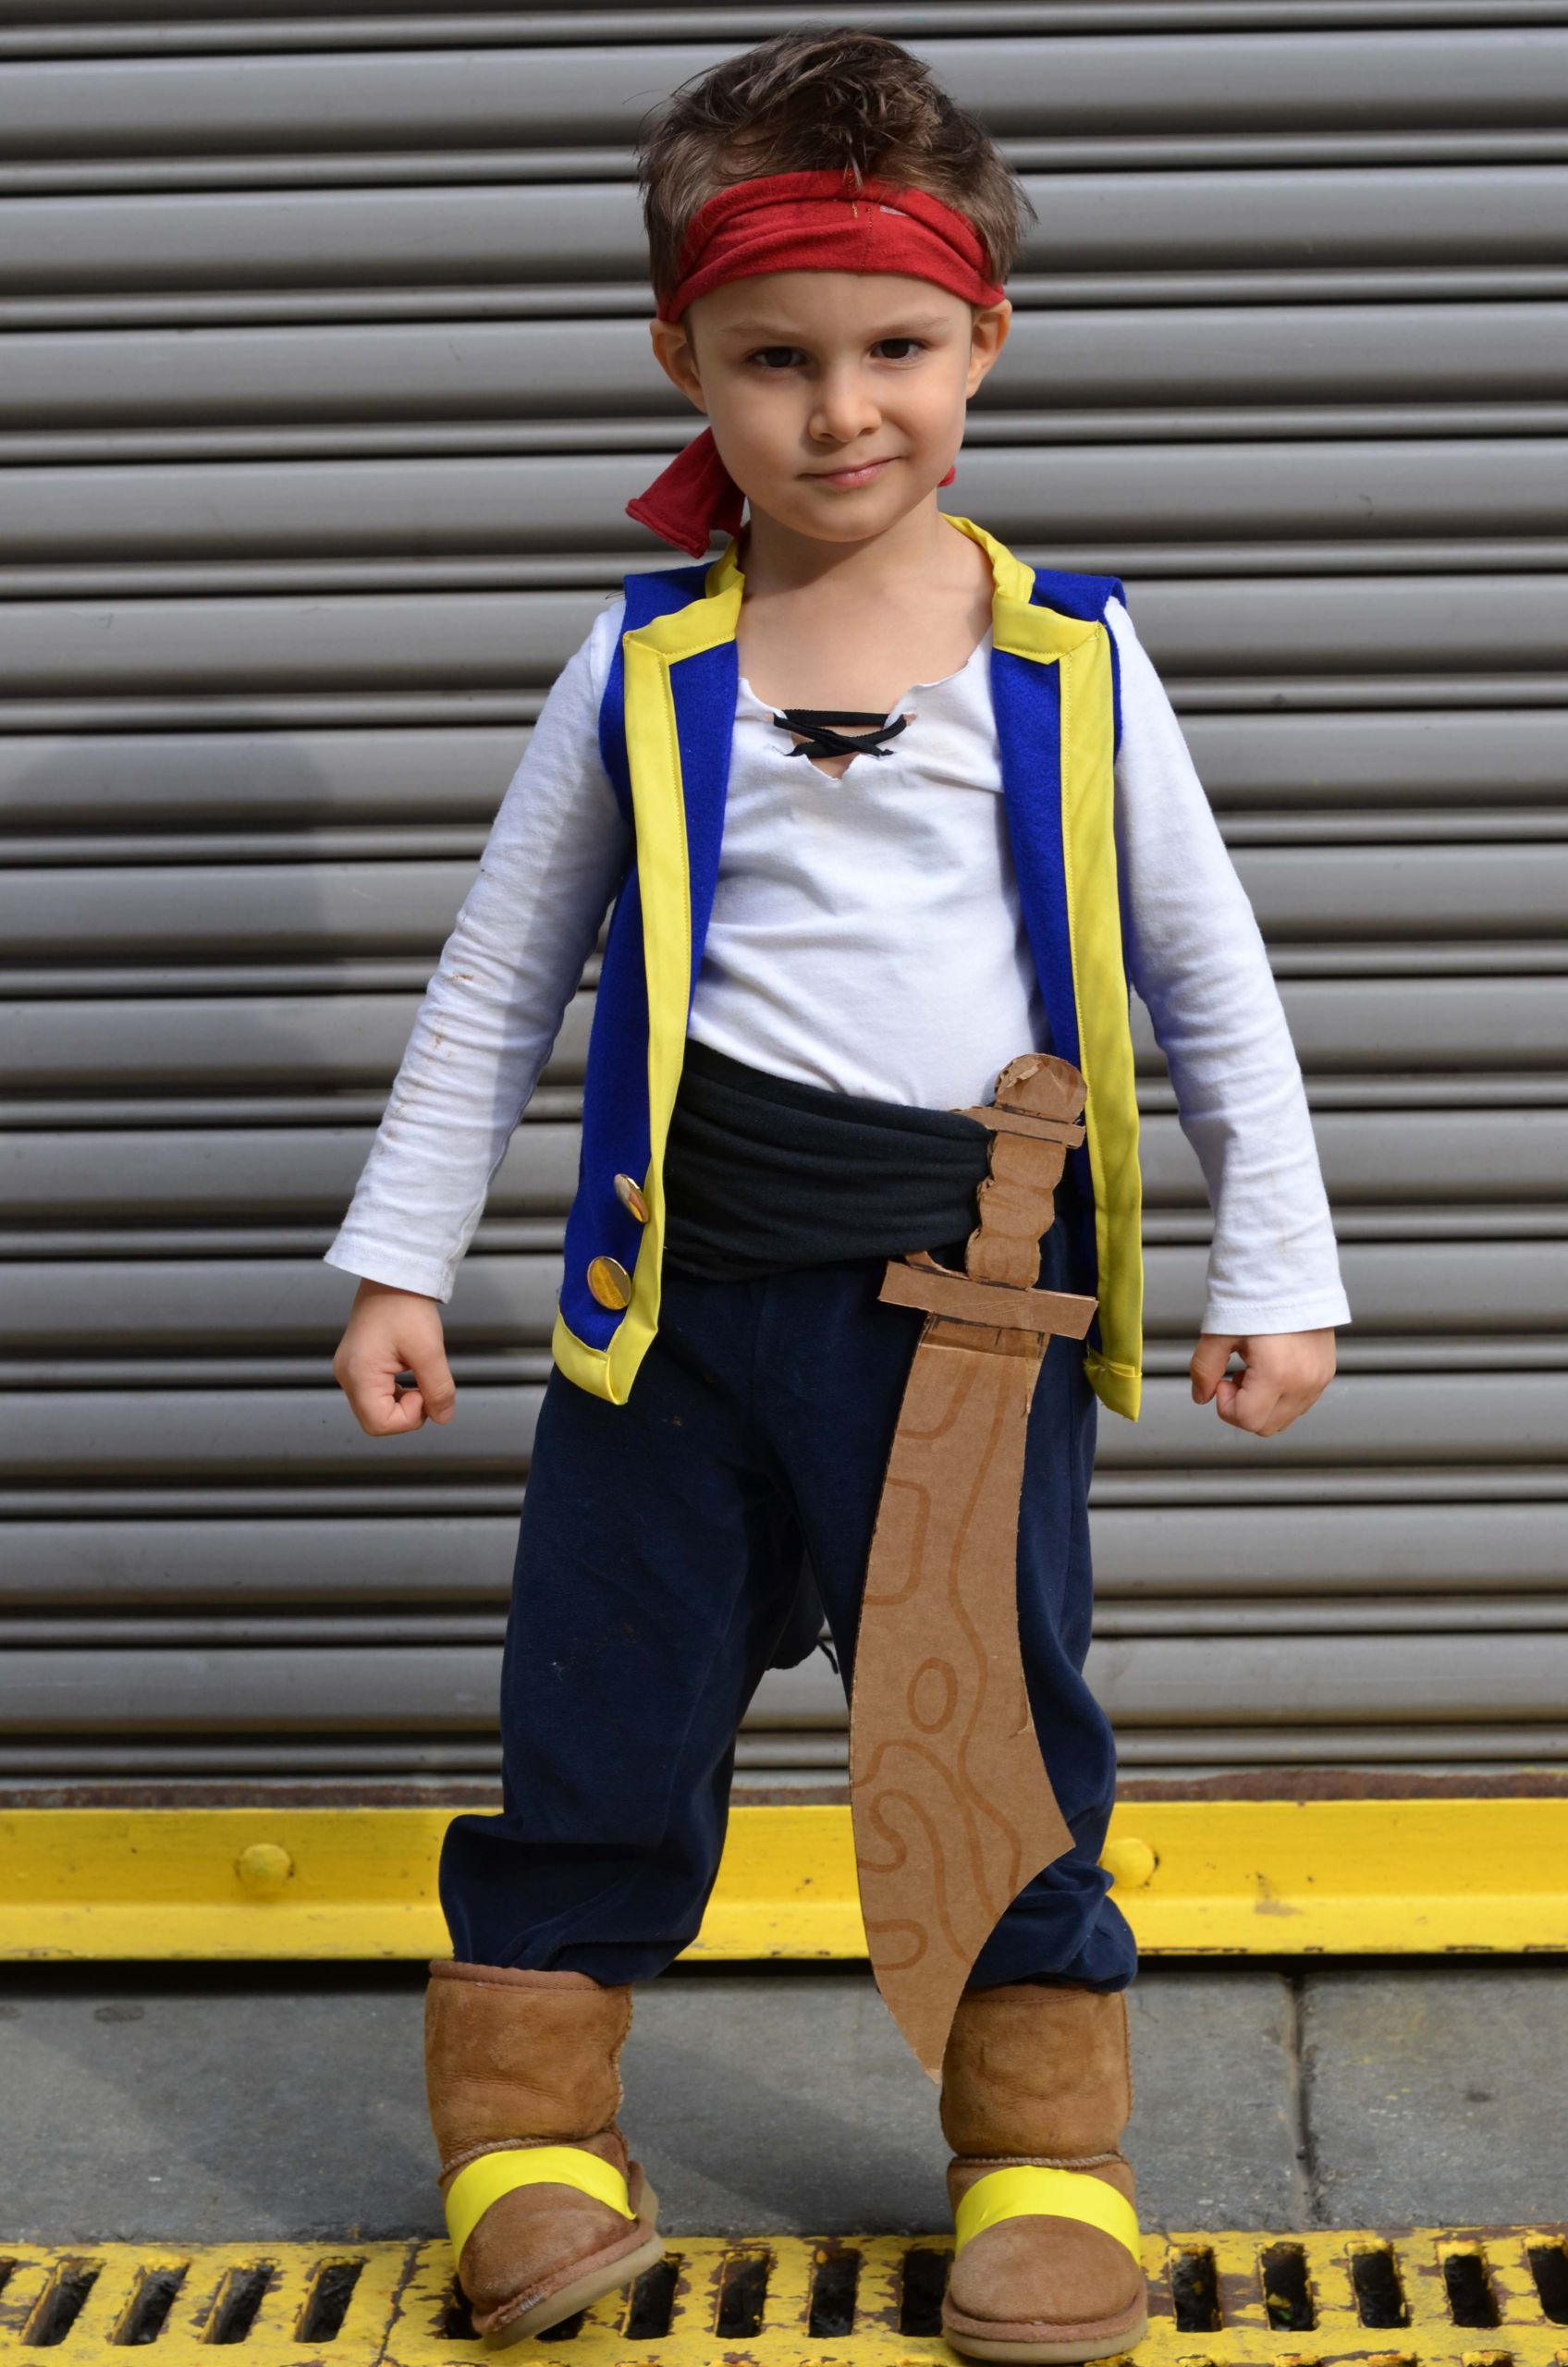 DIY Pirate Costume For Toddler
 DIY Halloween Costumes for Kids